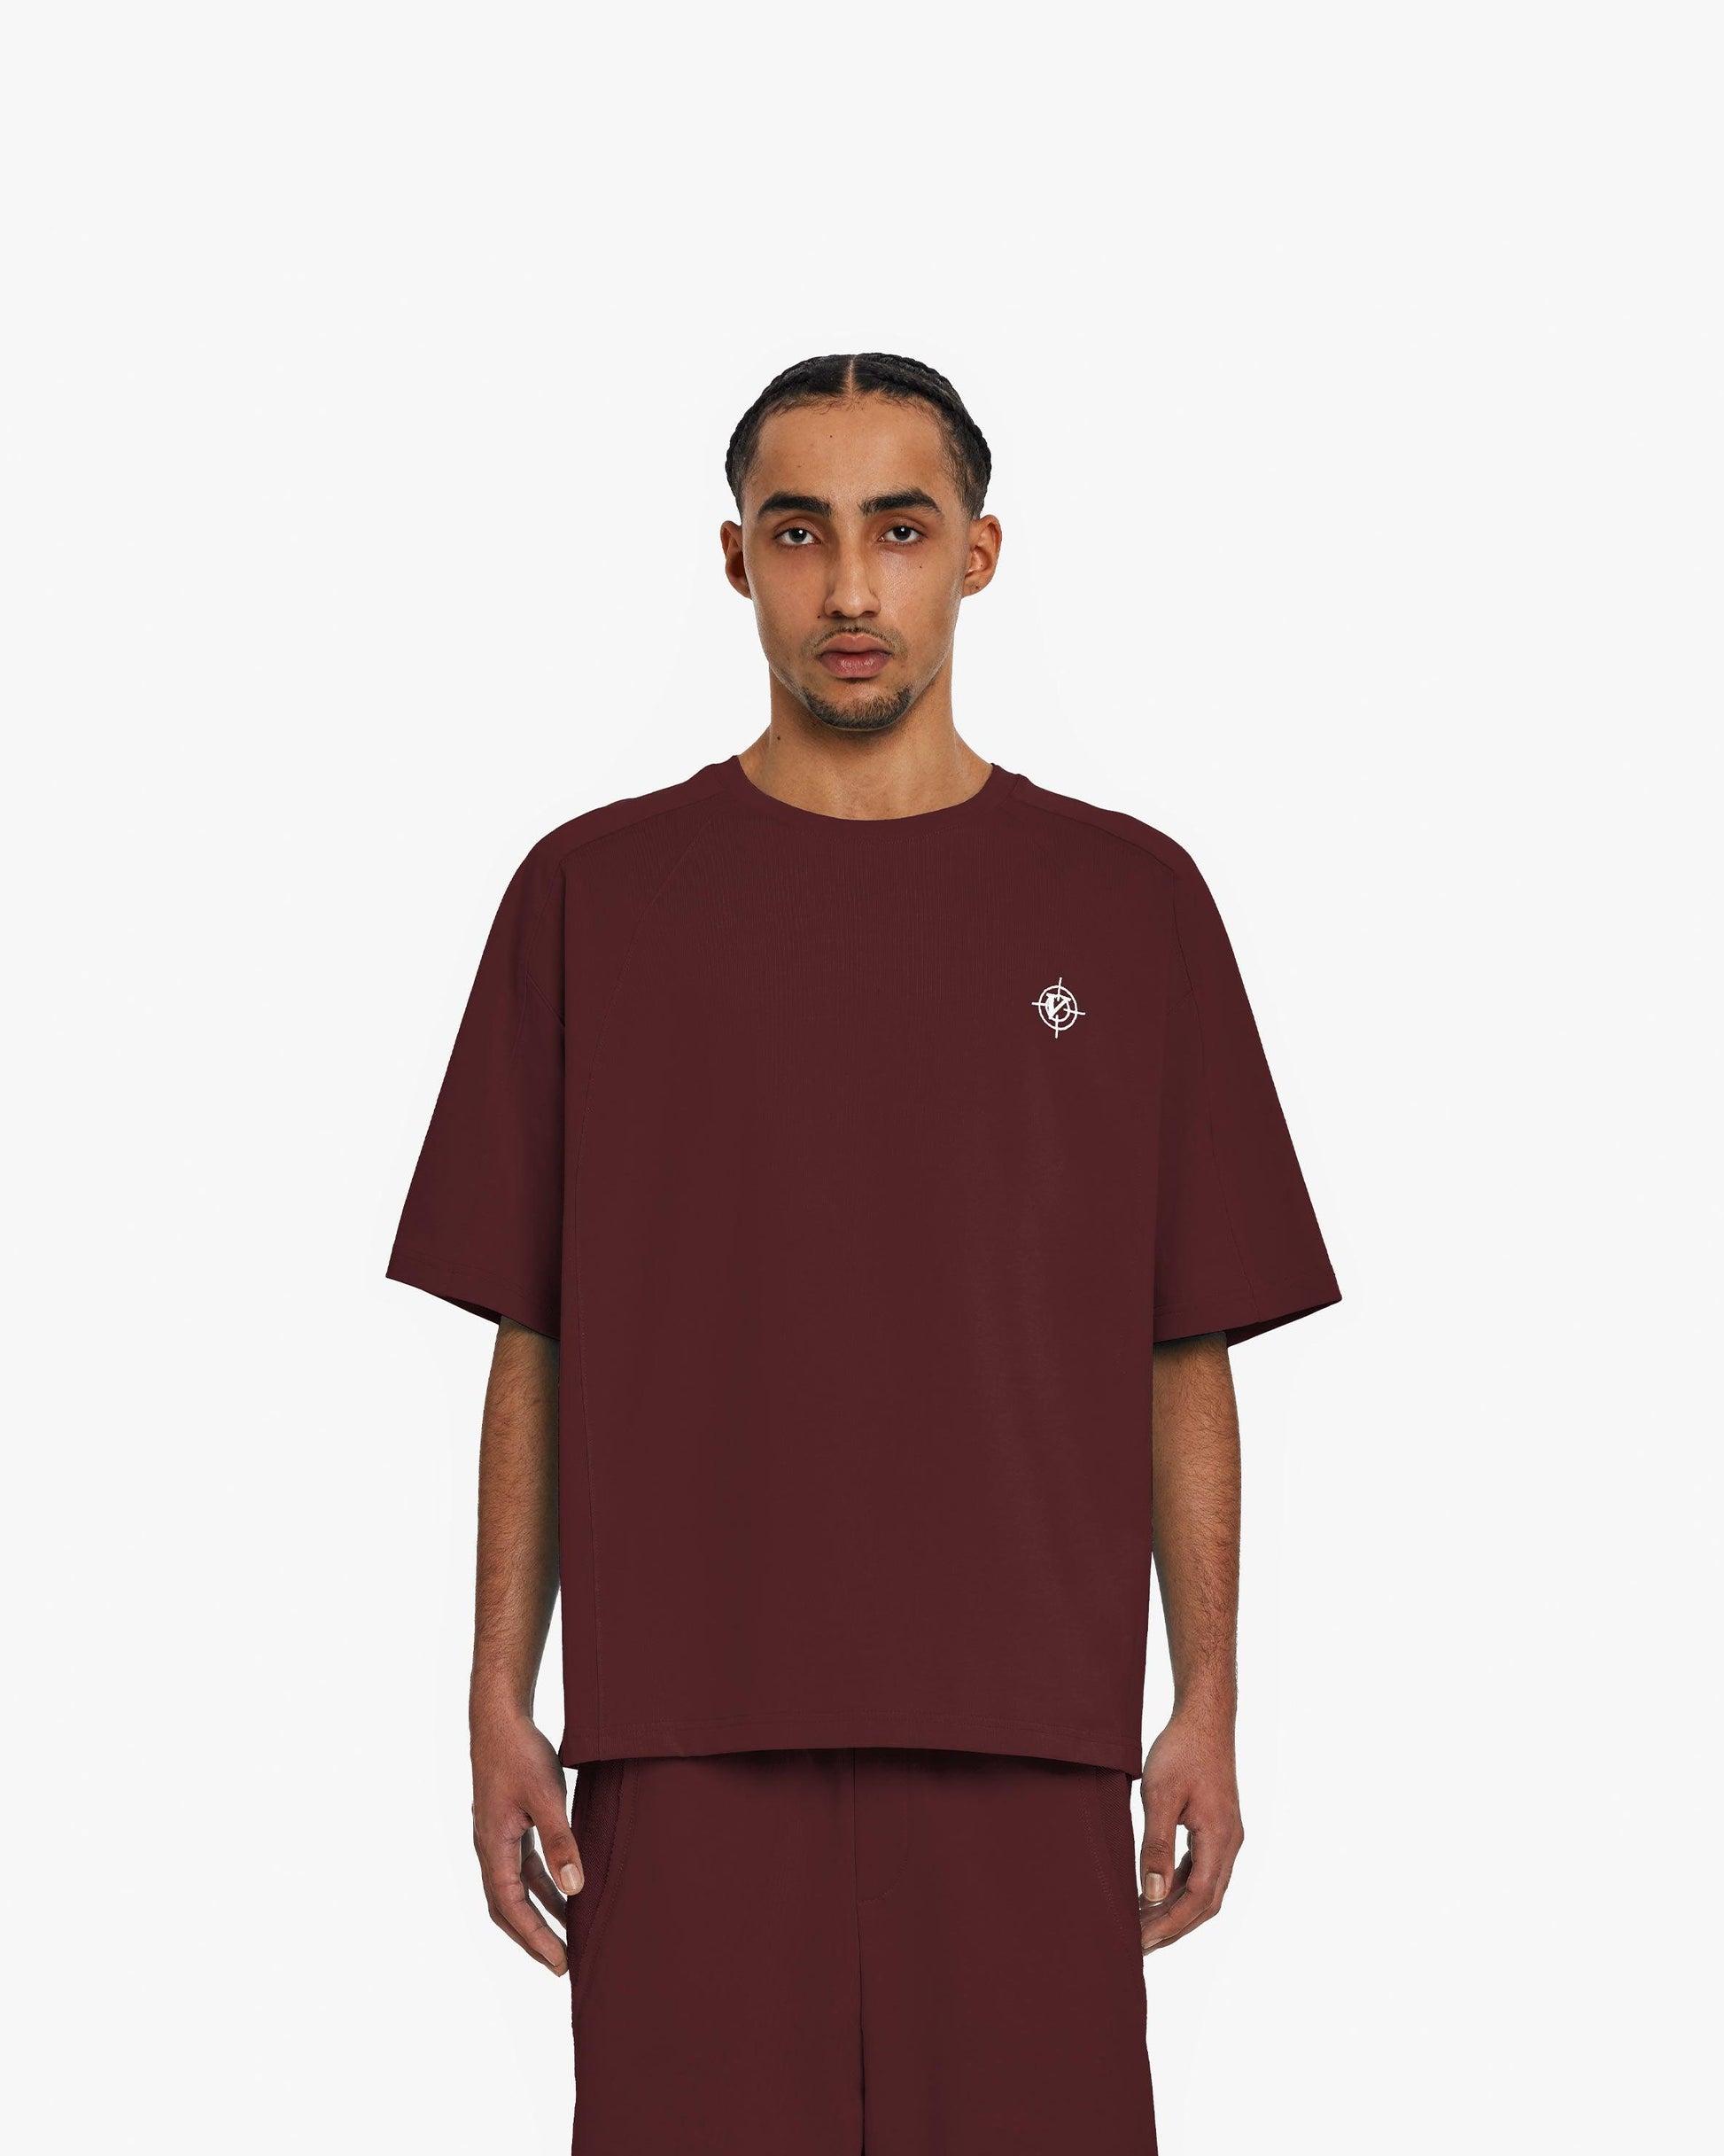 T-SHIRT WINE RED - VICINITY